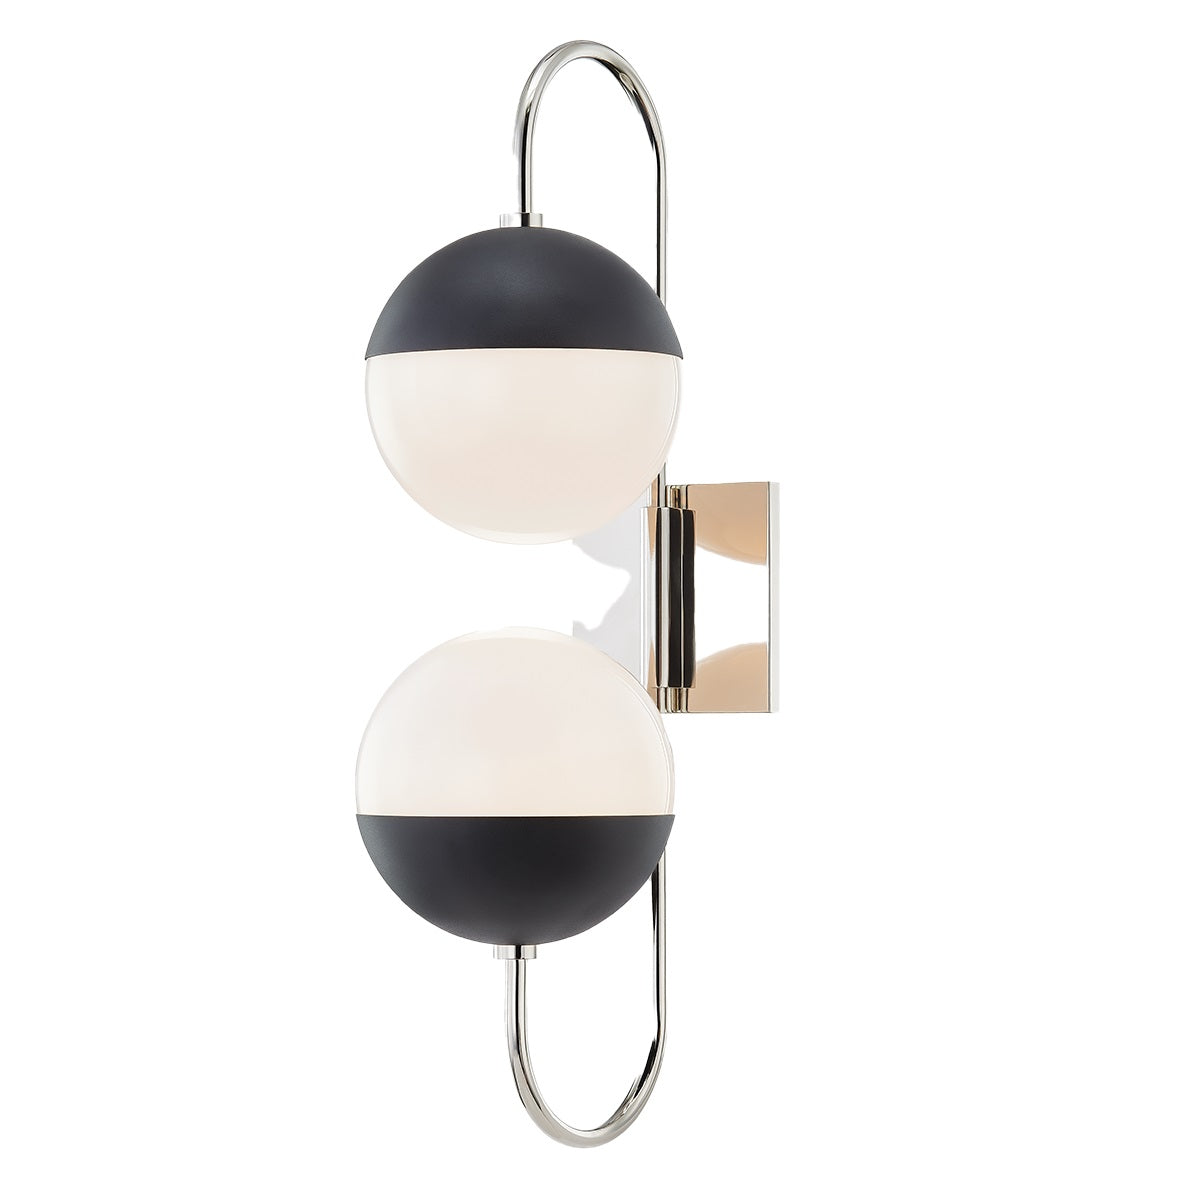 Mitzi, Renee Curved Double Wall Sconce